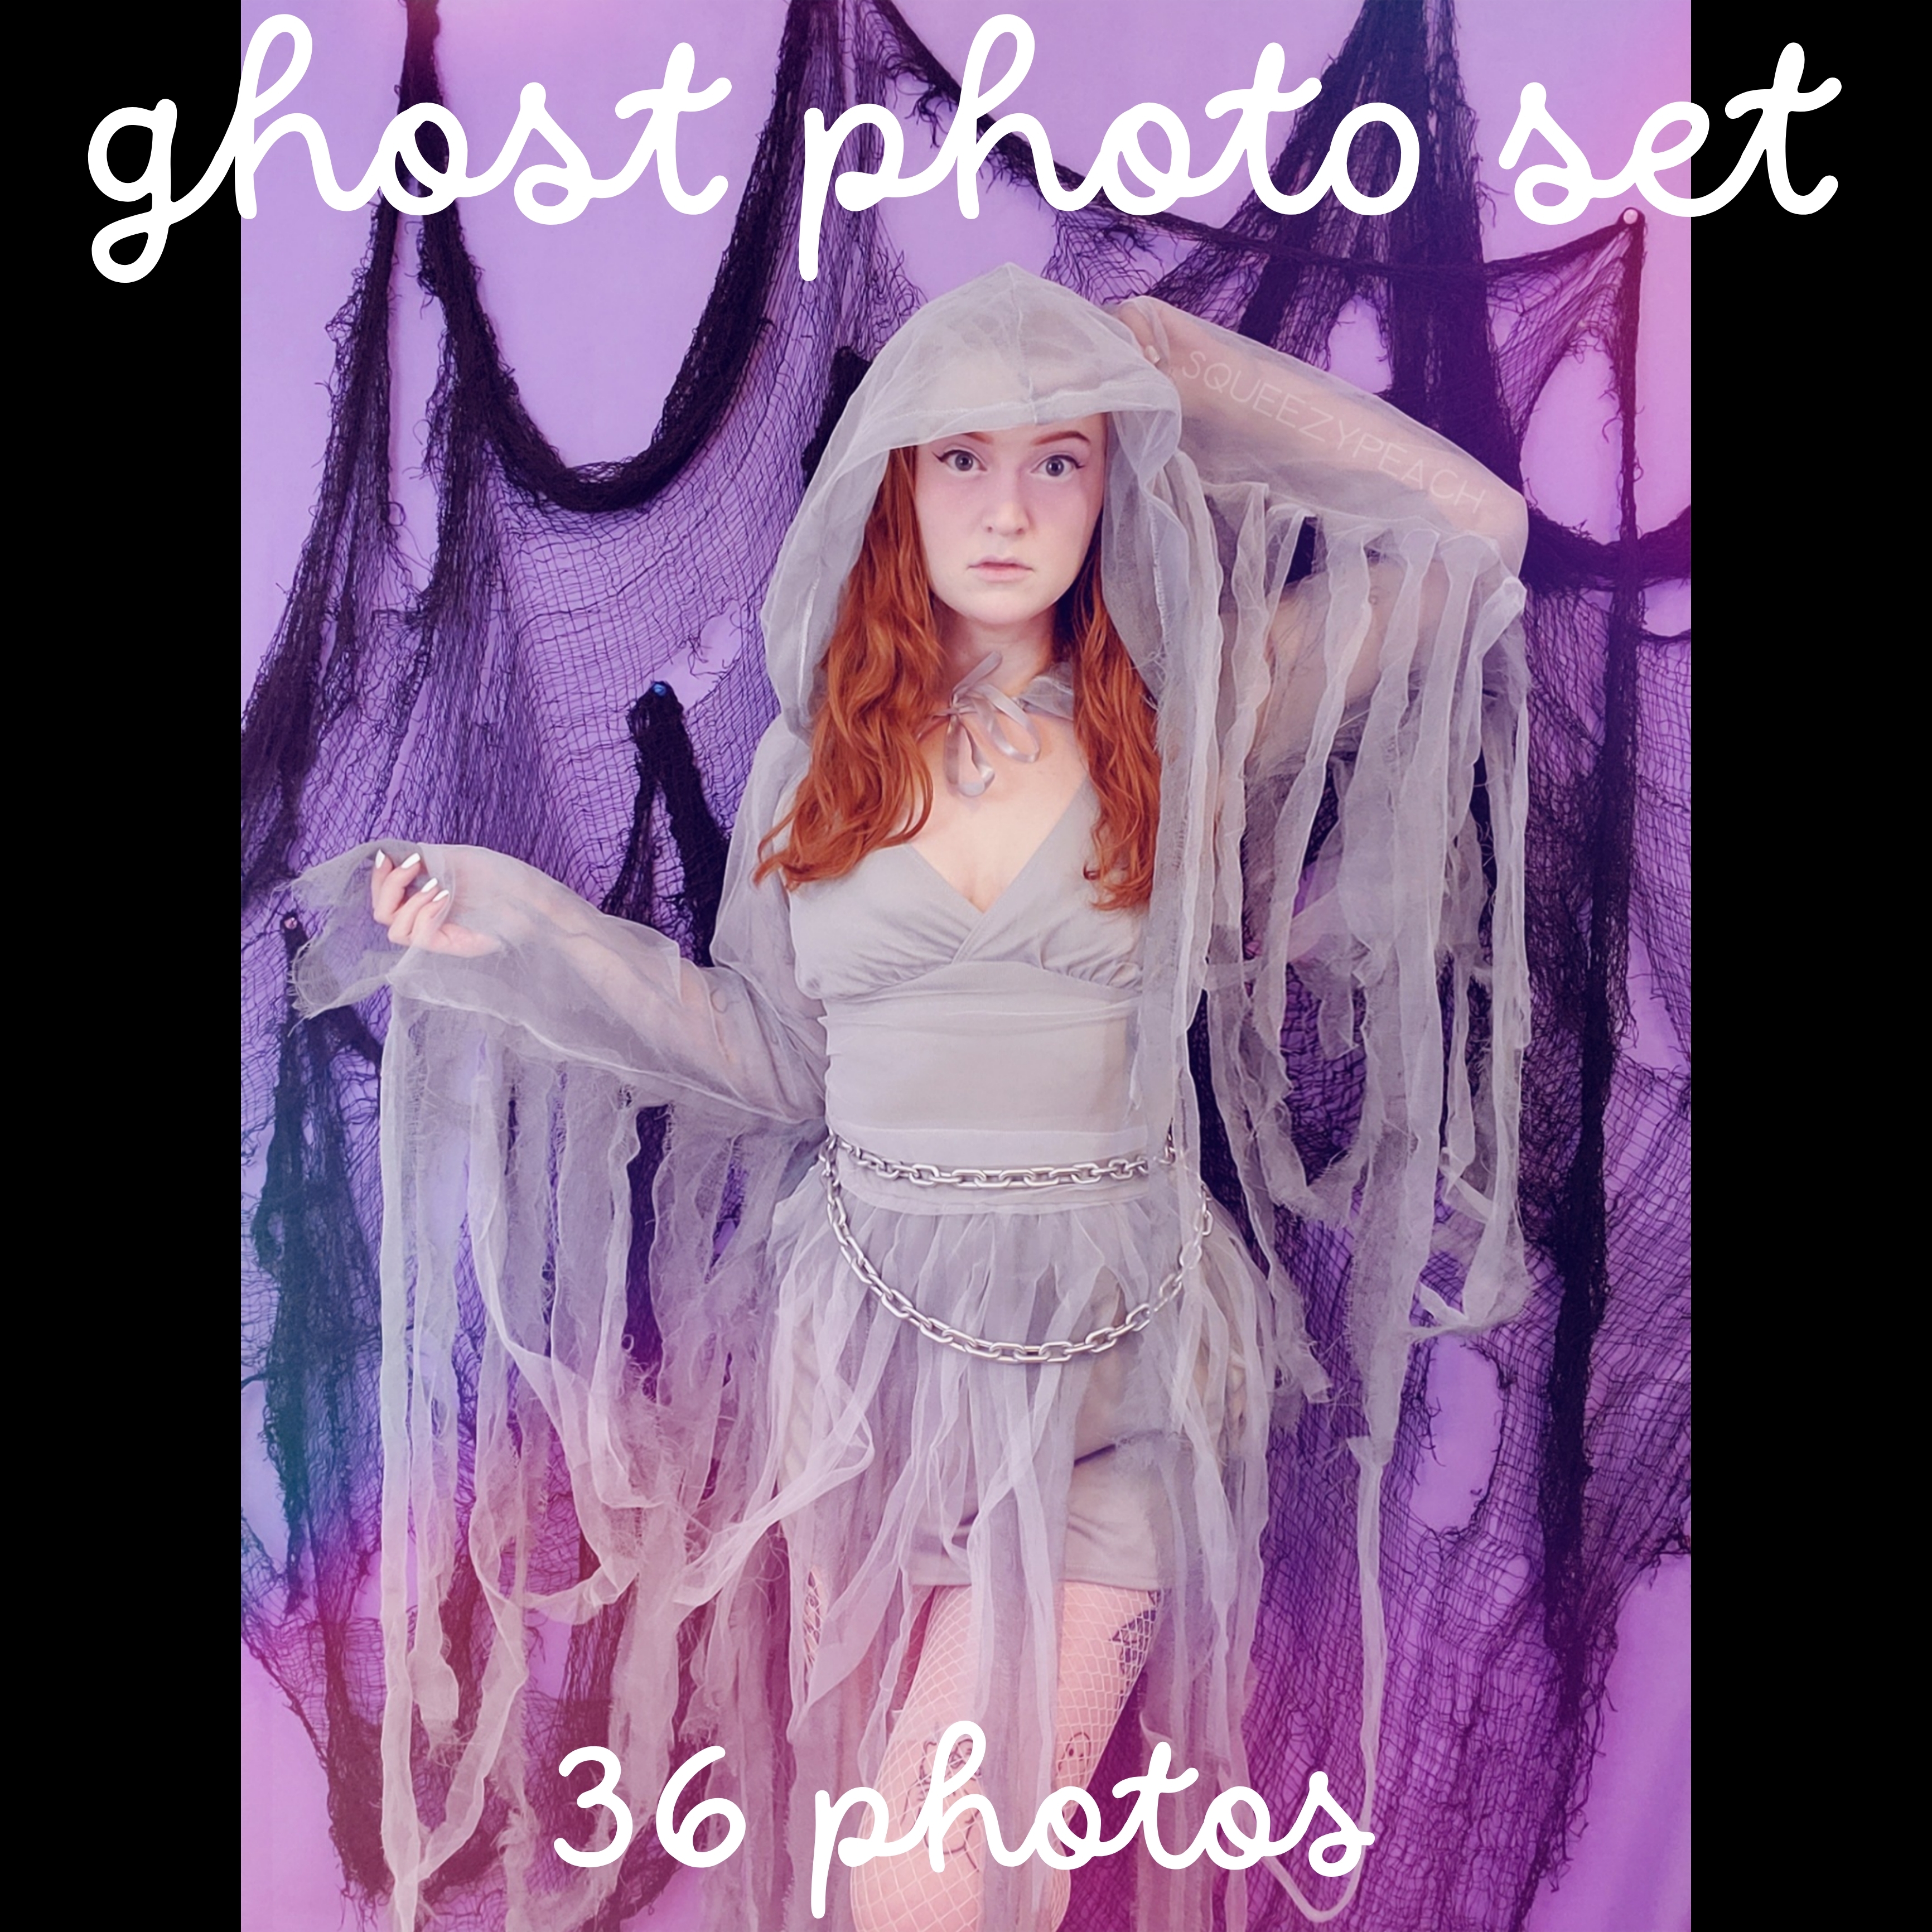 ghost photo set photo gallery by Squeezypeach